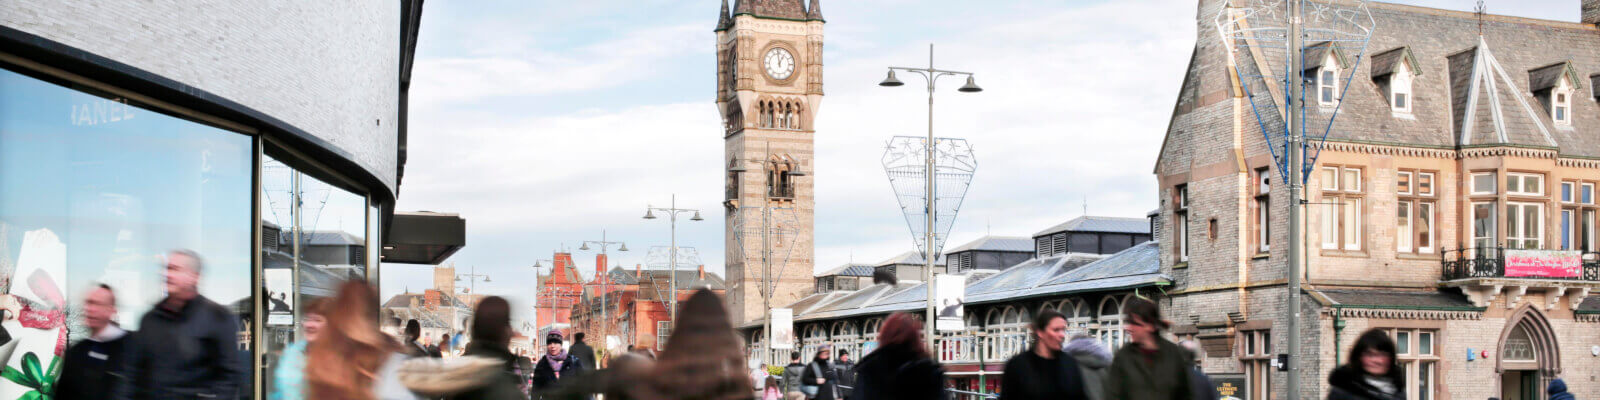 Blurred shoppers in Darlington town centre with town clock and indoor market in background